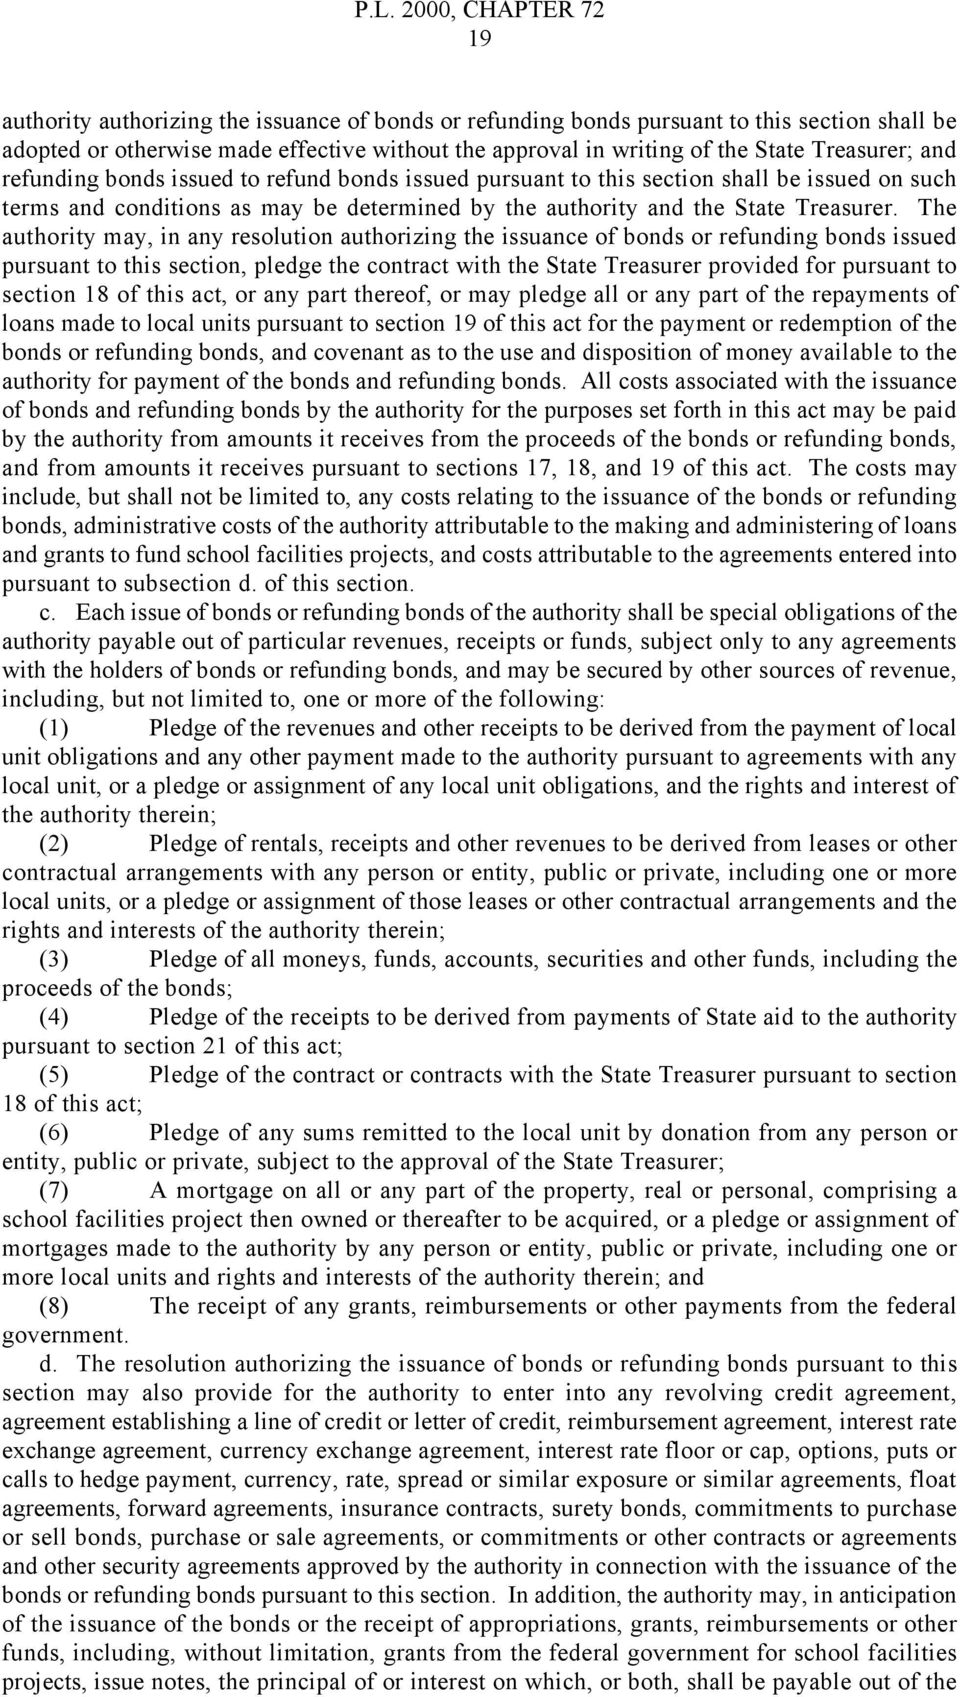 The authority may, in any resolution authorizing the issuance of bonds or refunding bonds issued pursuant to this section, pledge the contract with the State Treasurer provided for pursuant to